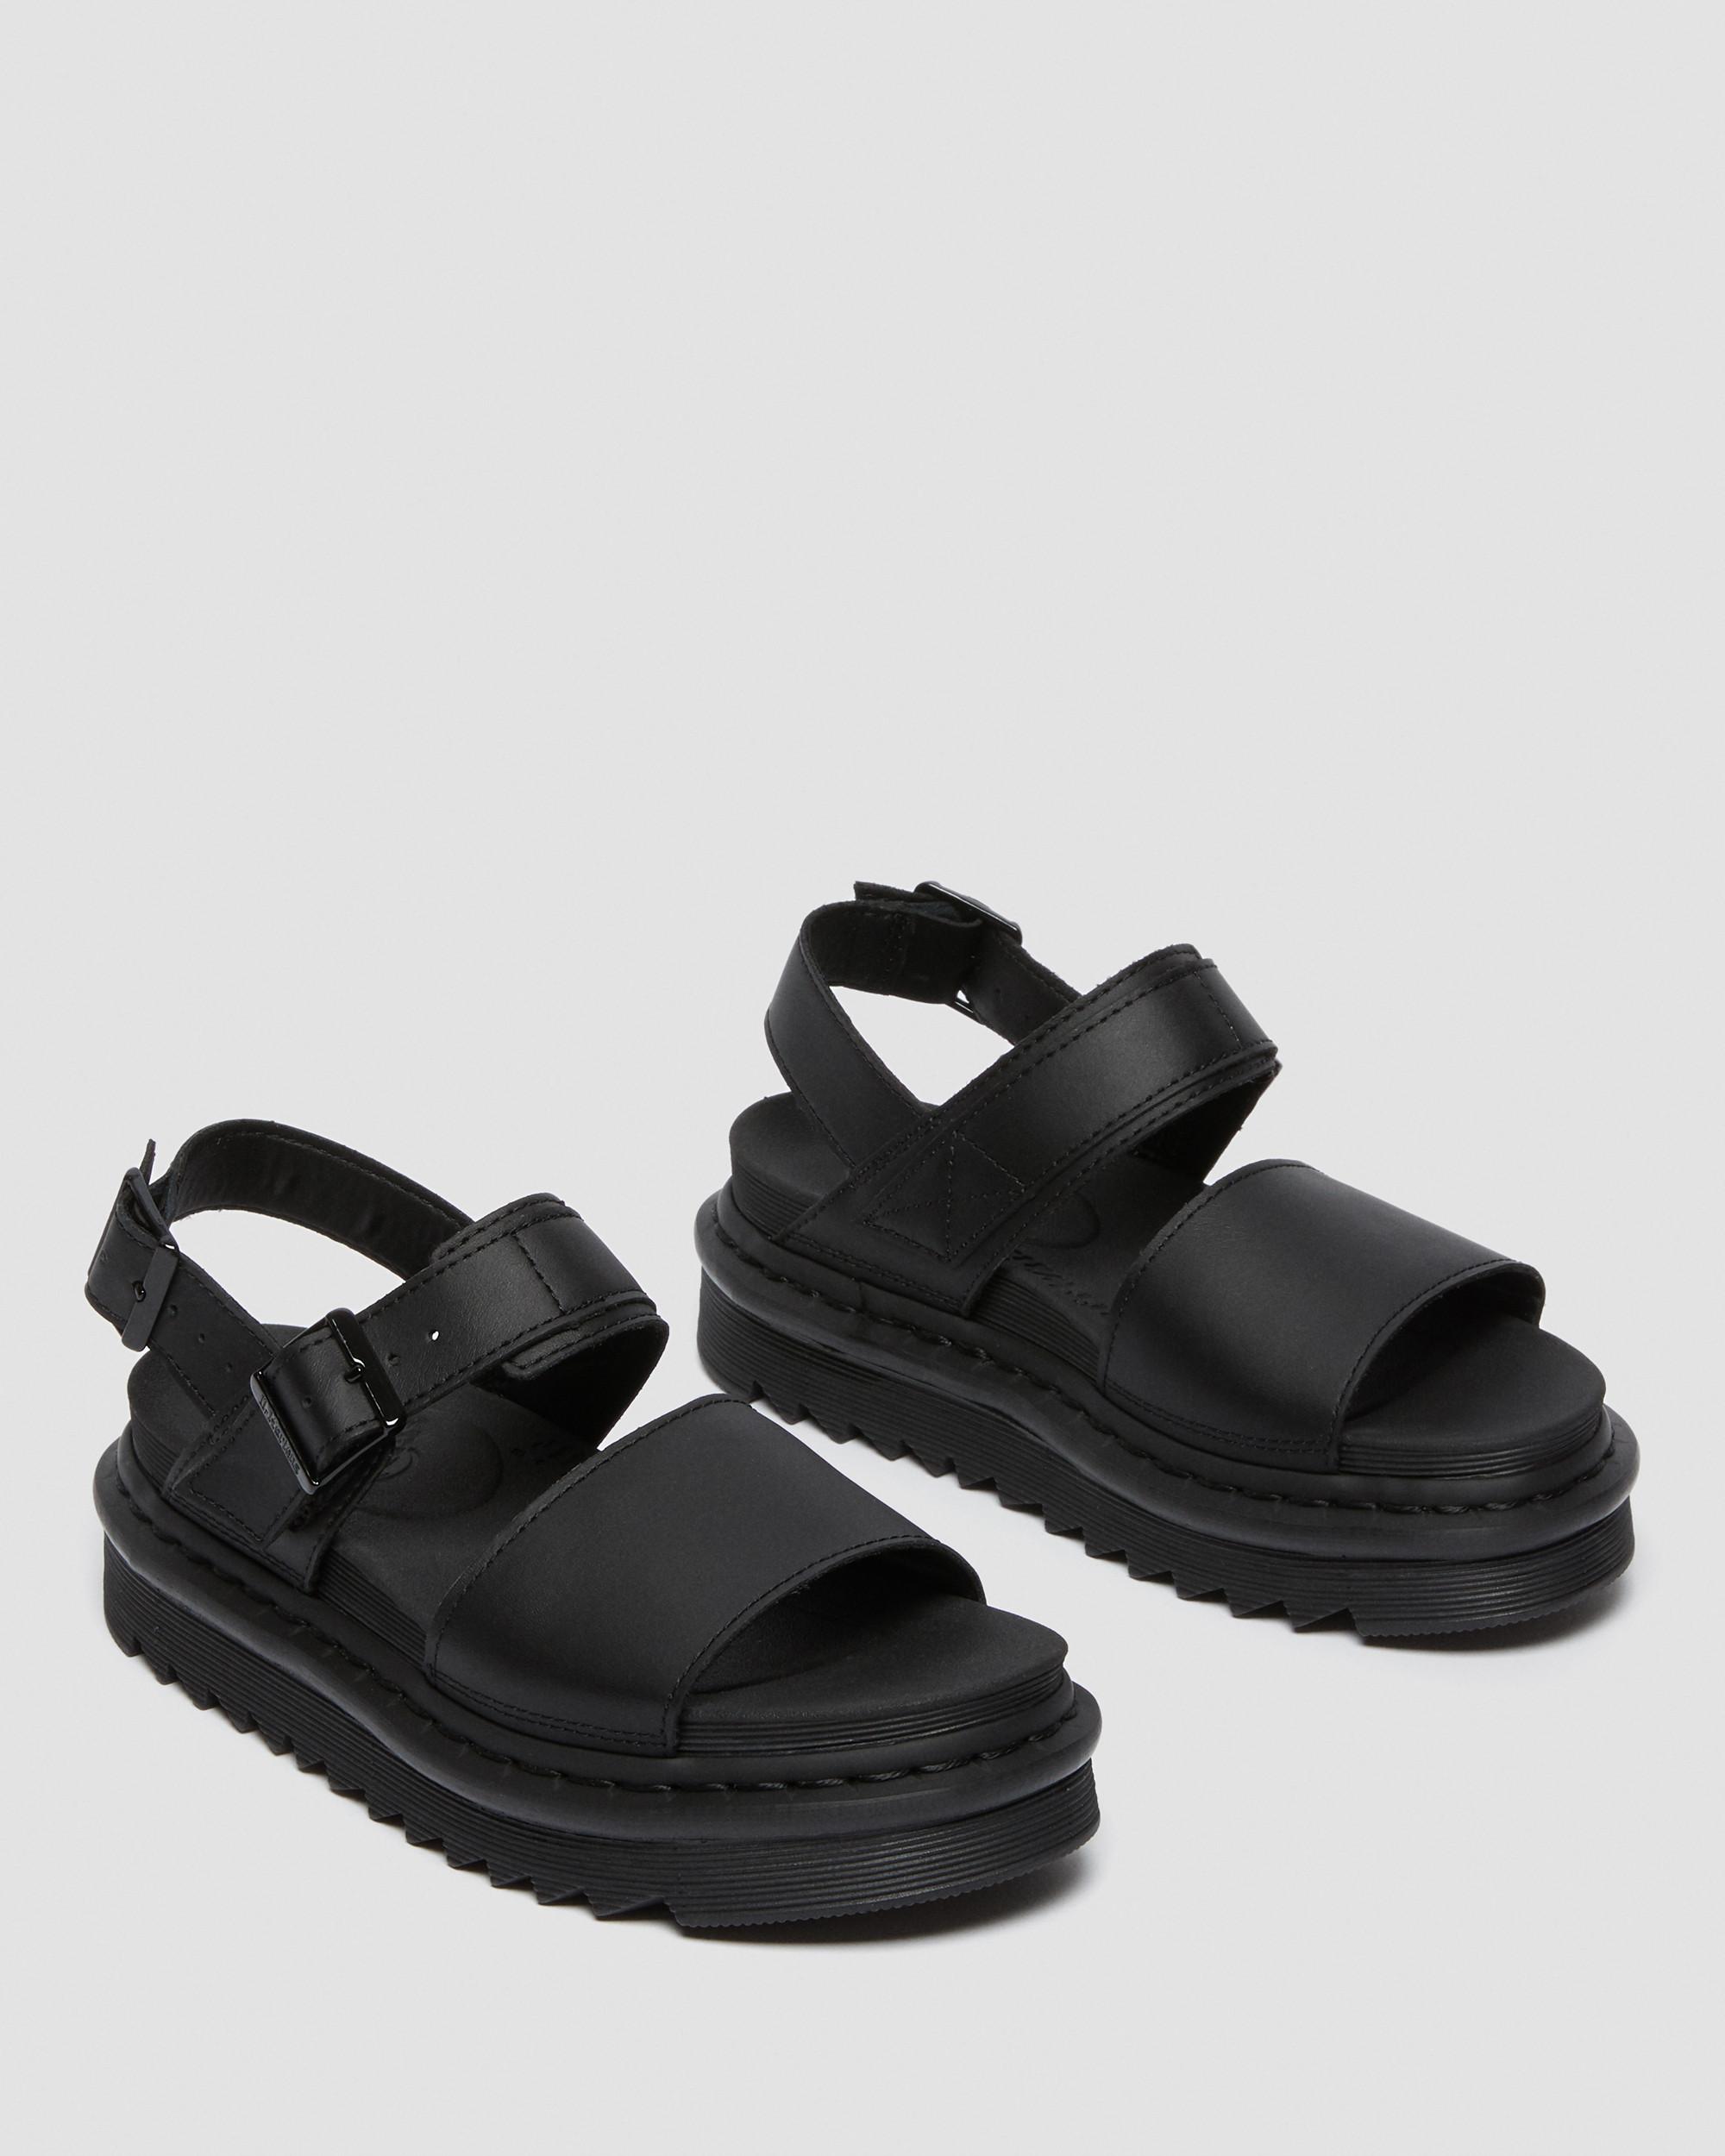 Voss Hydro Leather Strap SandalsVoss Hydro Leather Strap Sandals Dr. Martens